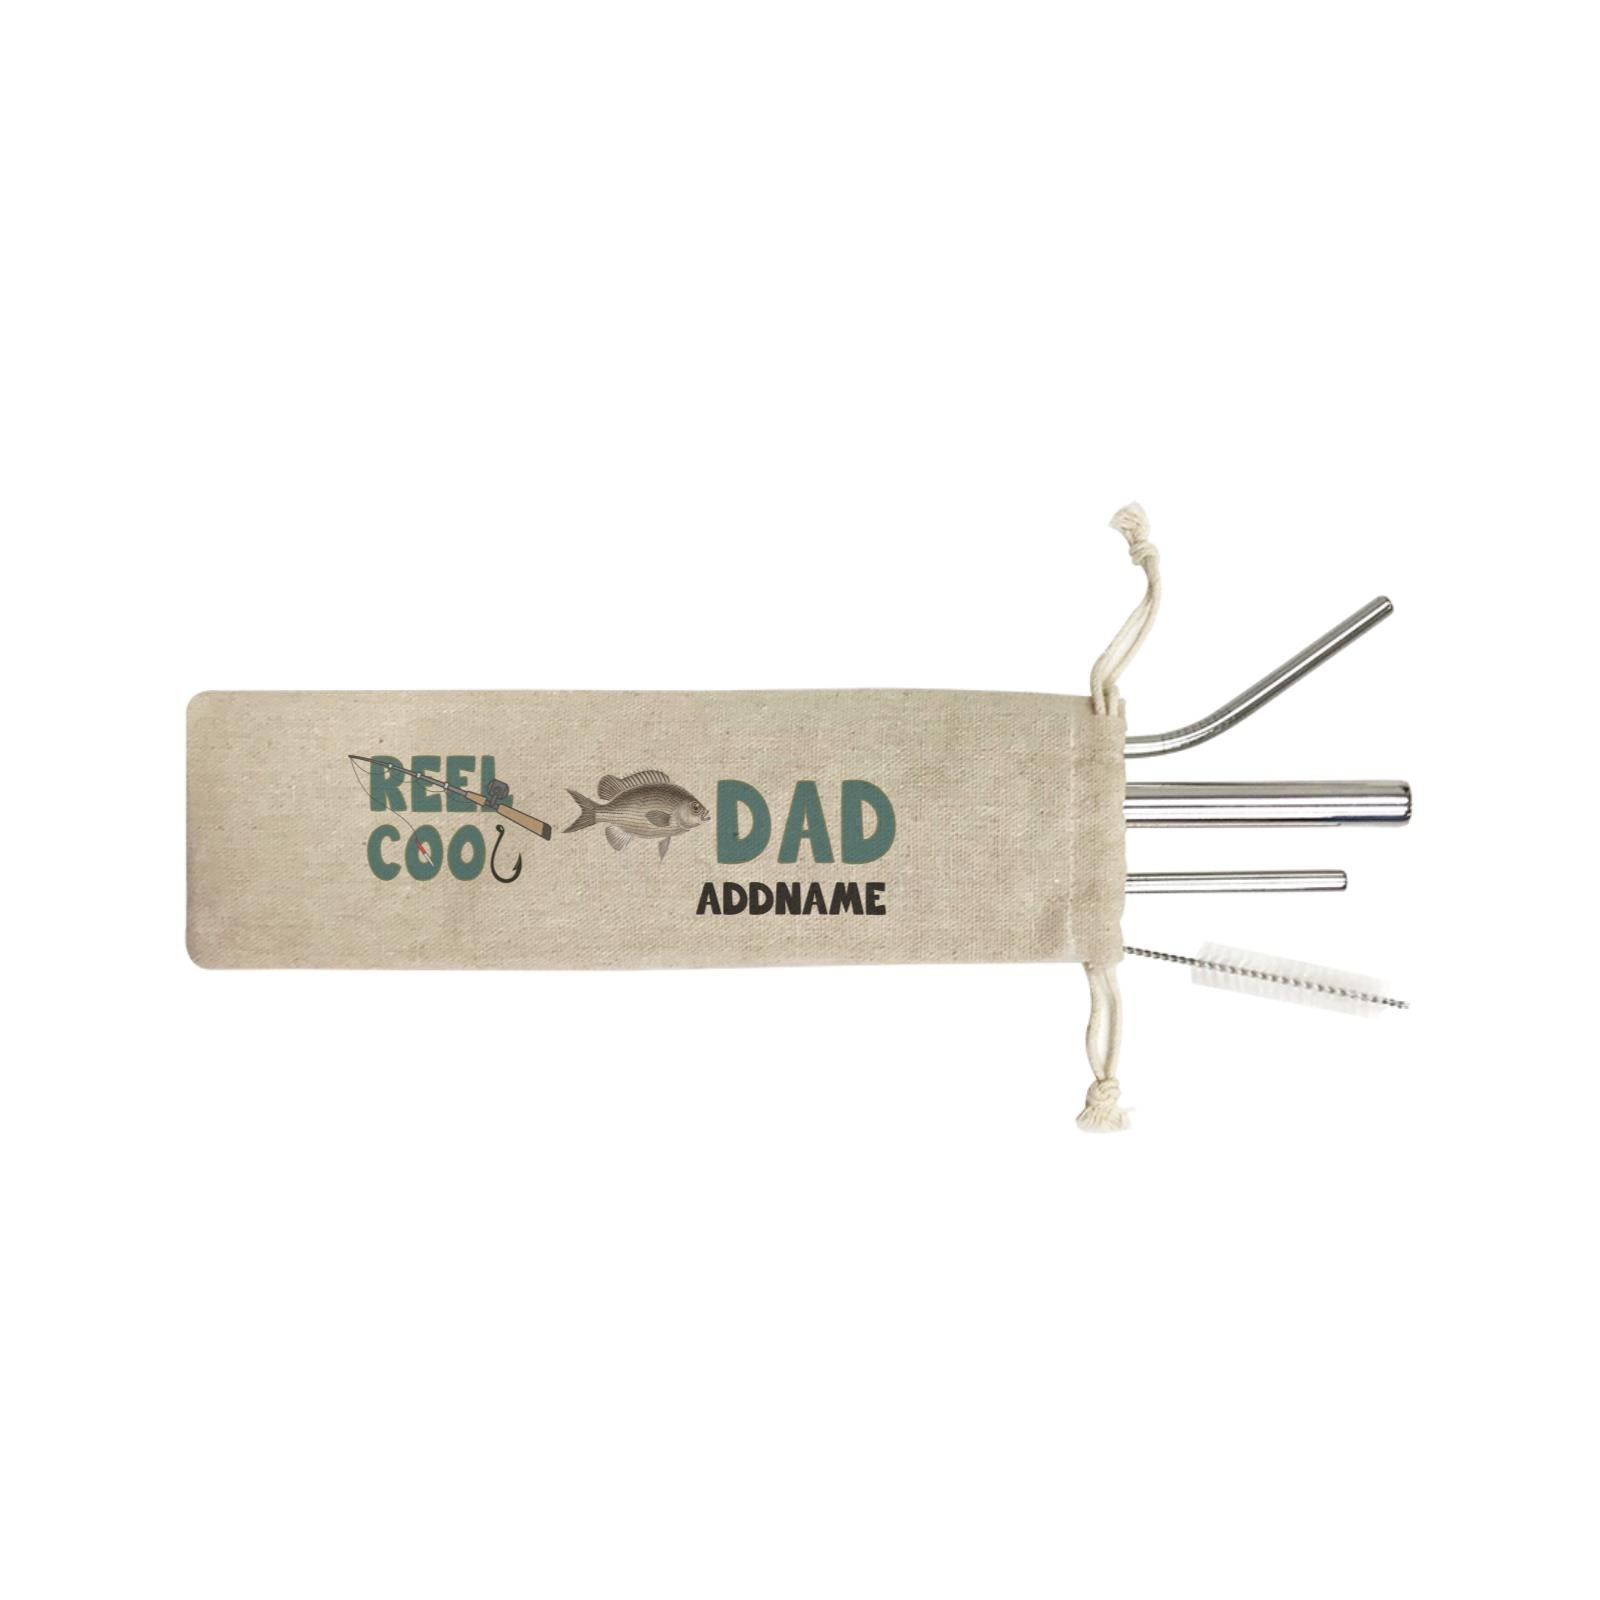 Reel Cool Dad Addname SB 4-In-1 Stainless Steel Straw Set in Satchel